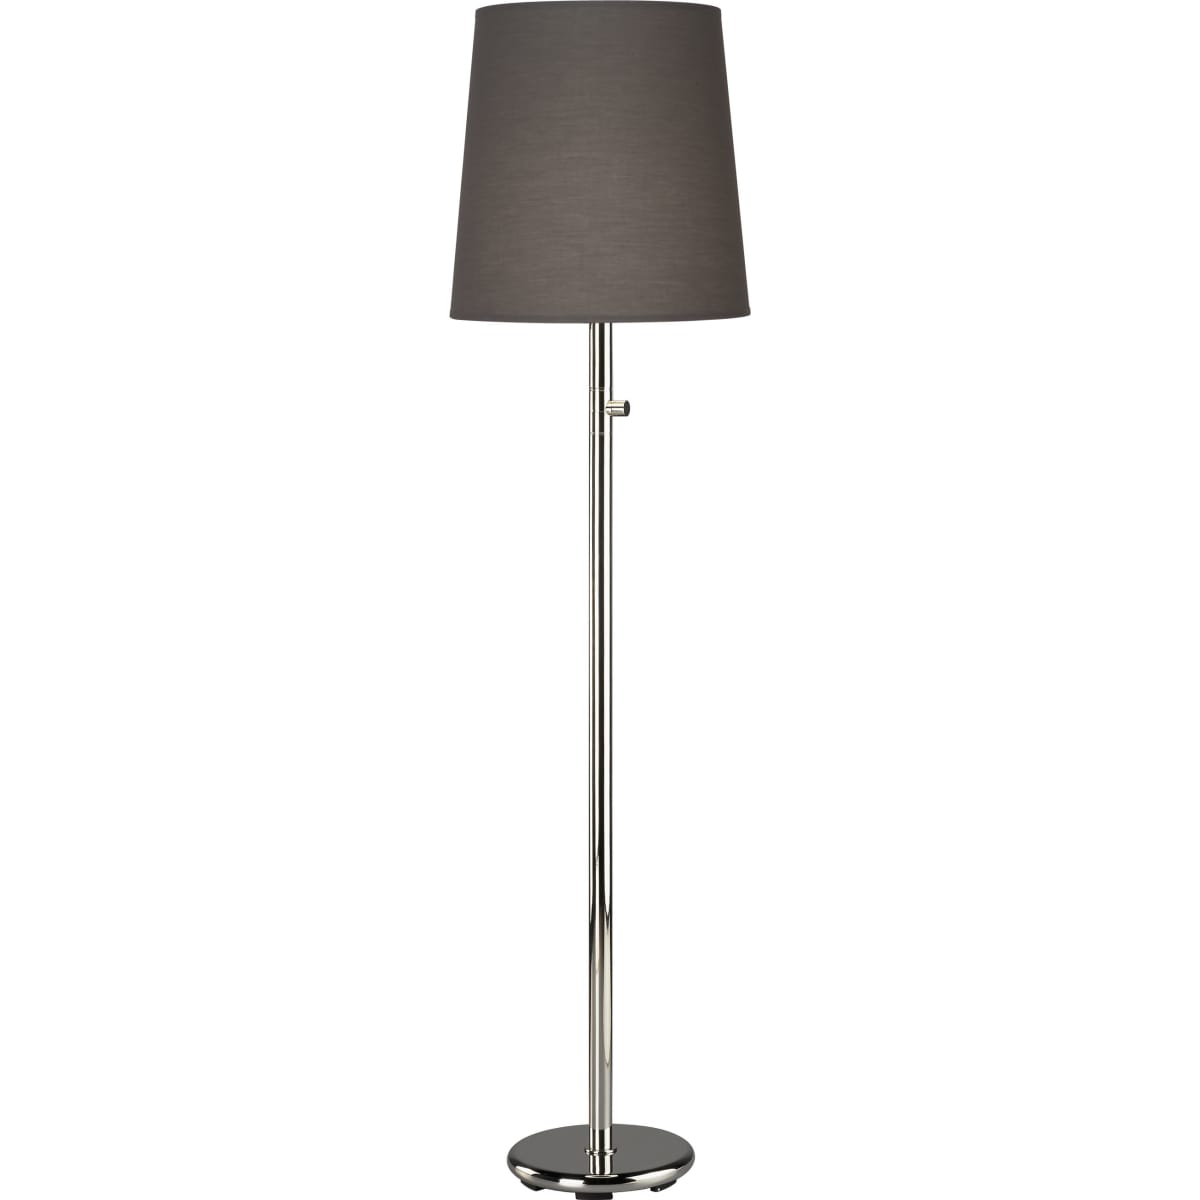 Robert Abbey 2080g Polished Nickel Buster 63 Chica Floor Lamp